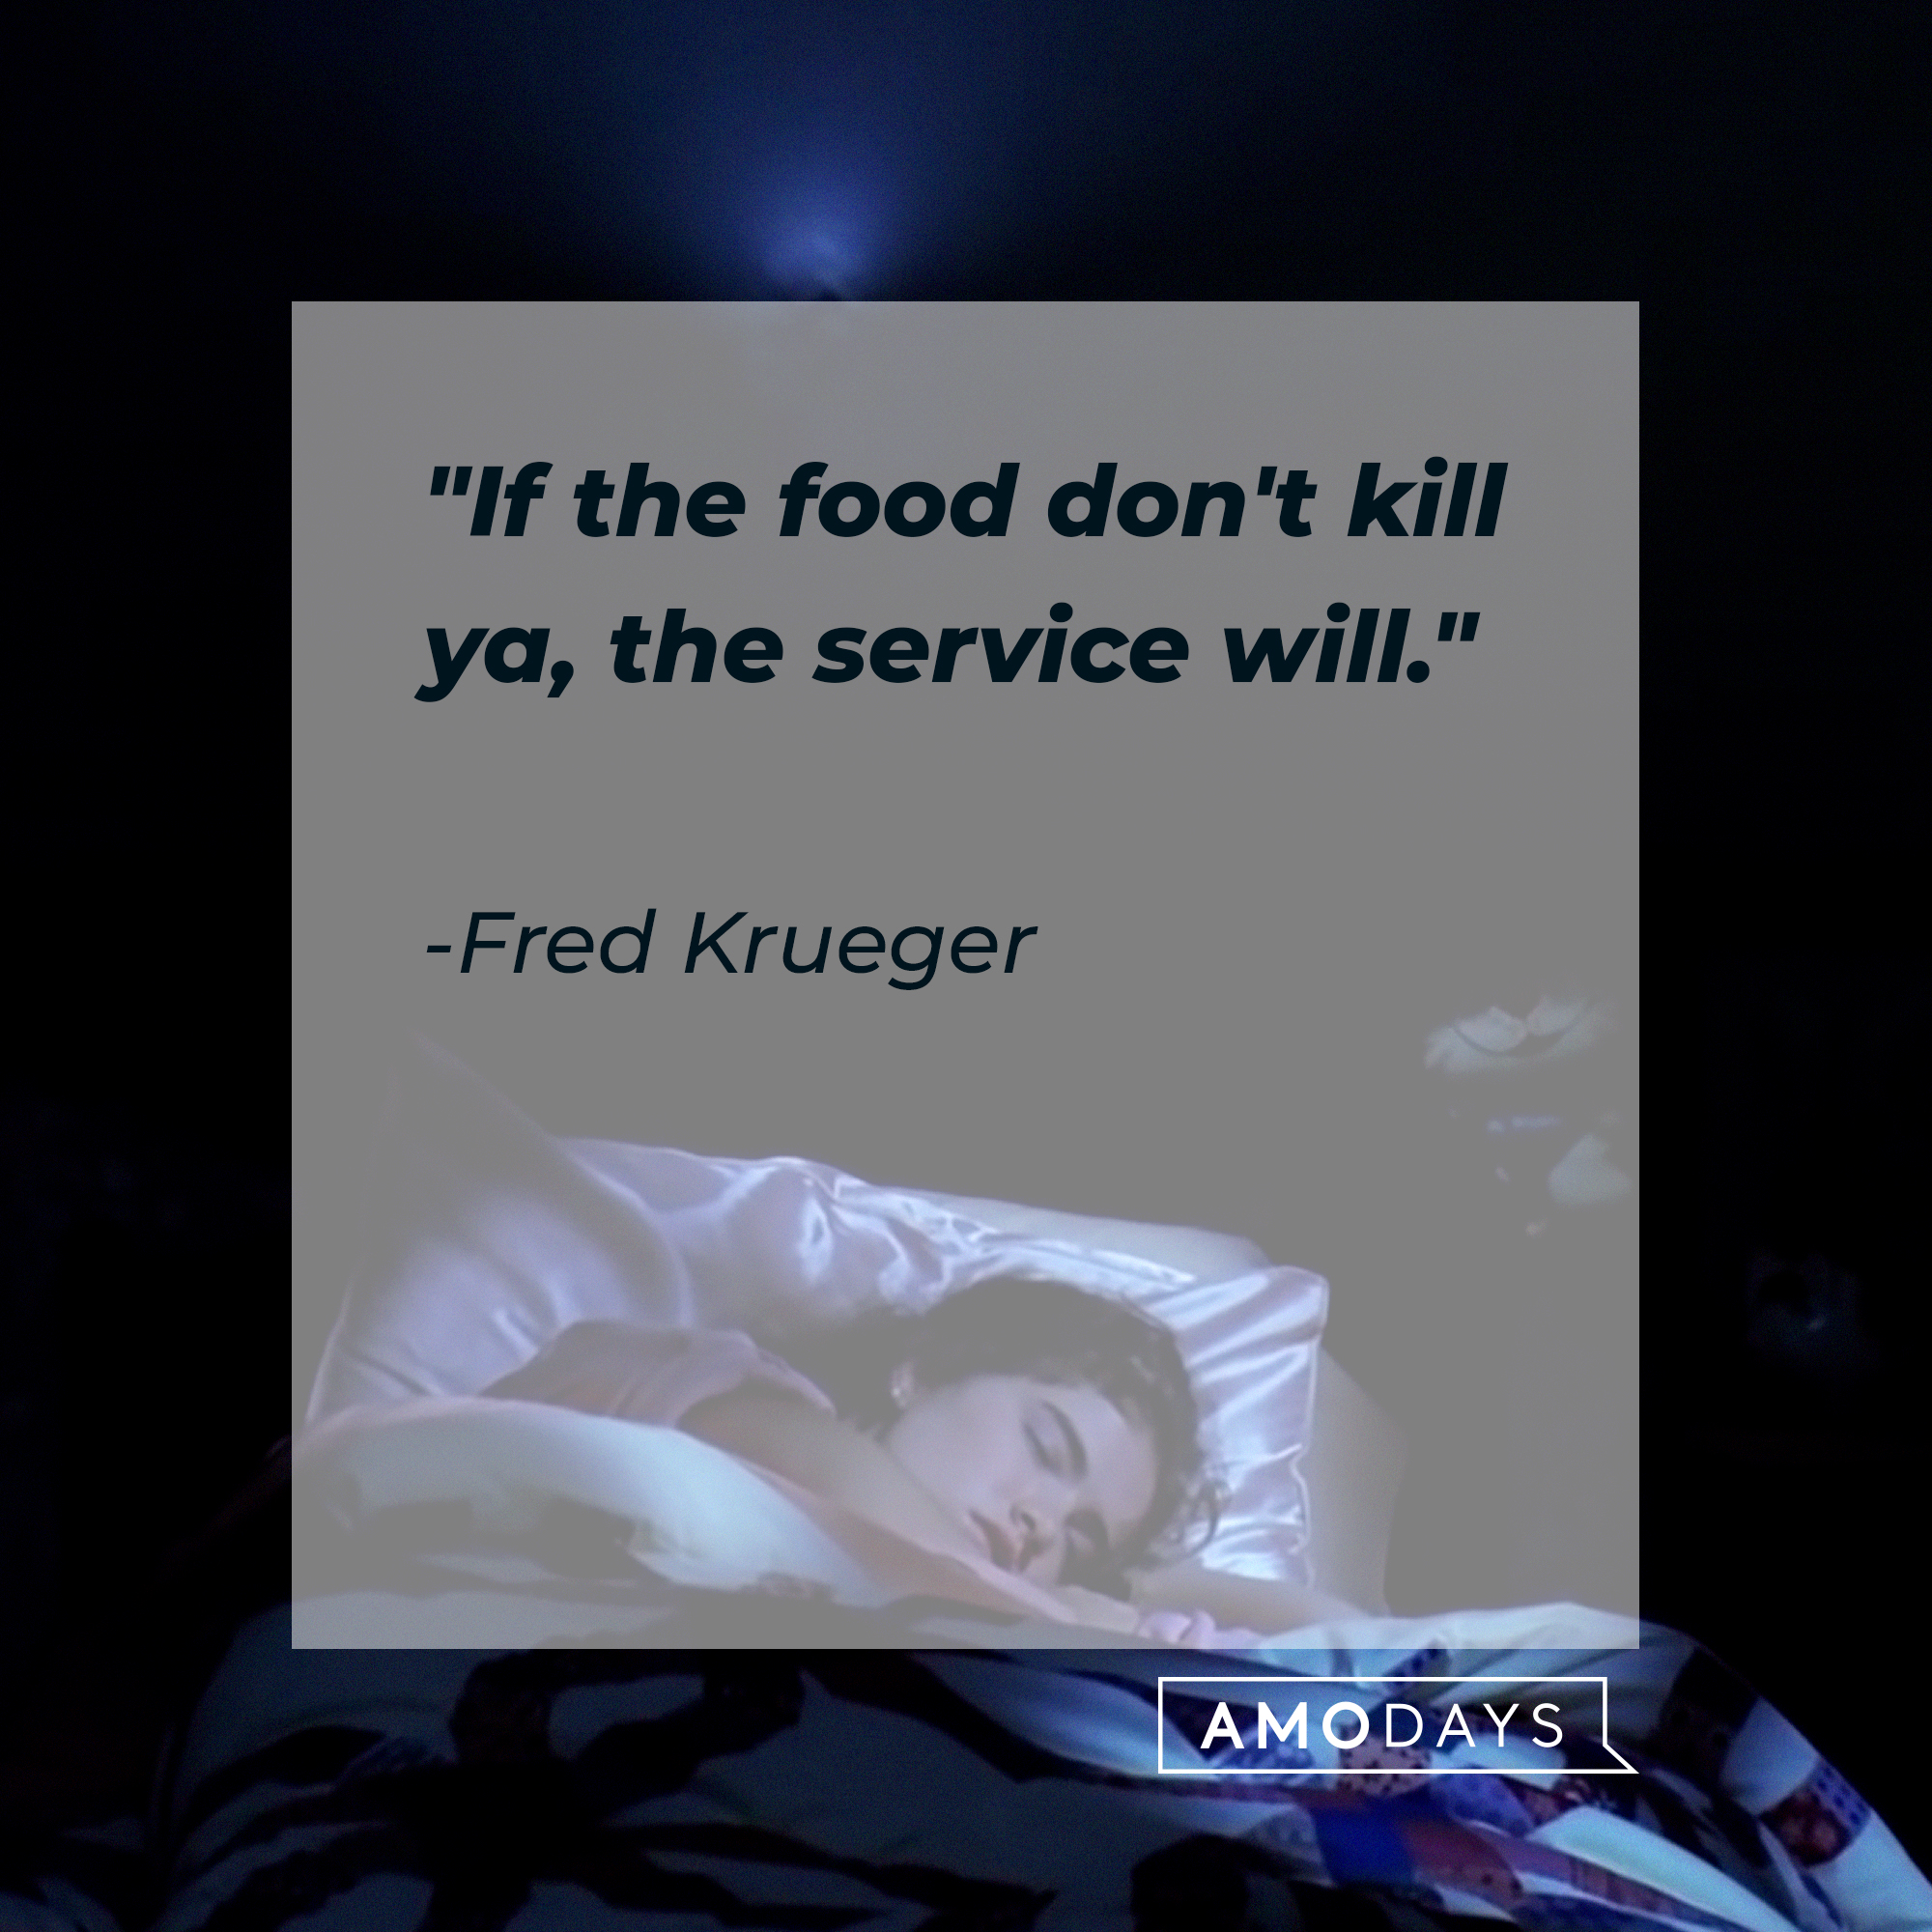 Freddy Krueger's quote: "If the food don't kill ya, the service will." | Source: Facebook/ANightmareonElmStreet